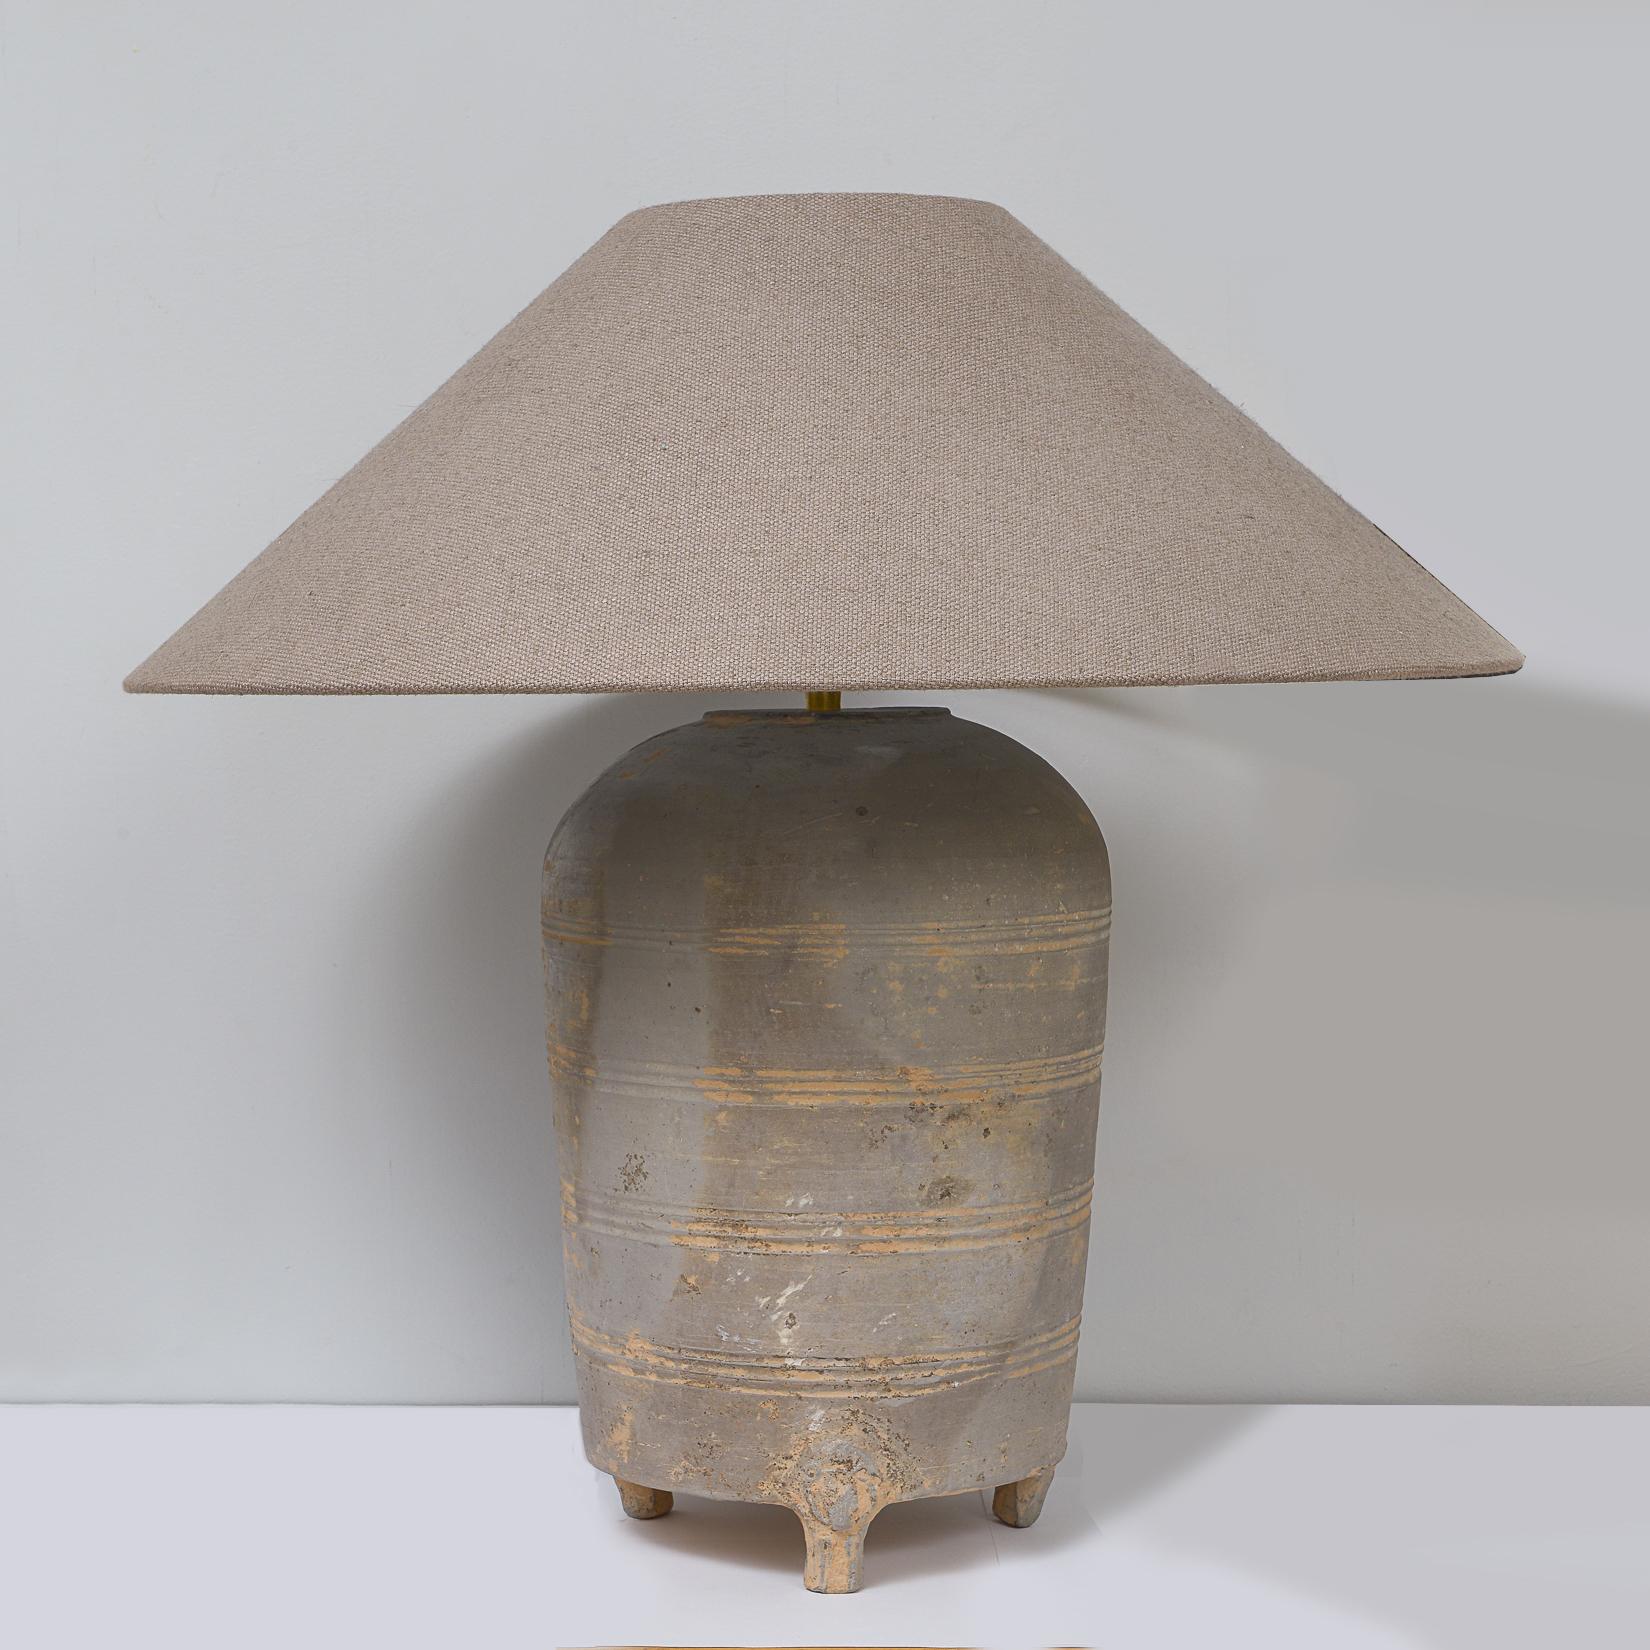 Ceramic Han Dynasty Lamp.
Please note certificate of authenticity is available.
The Height to top of bulb fitting is 16